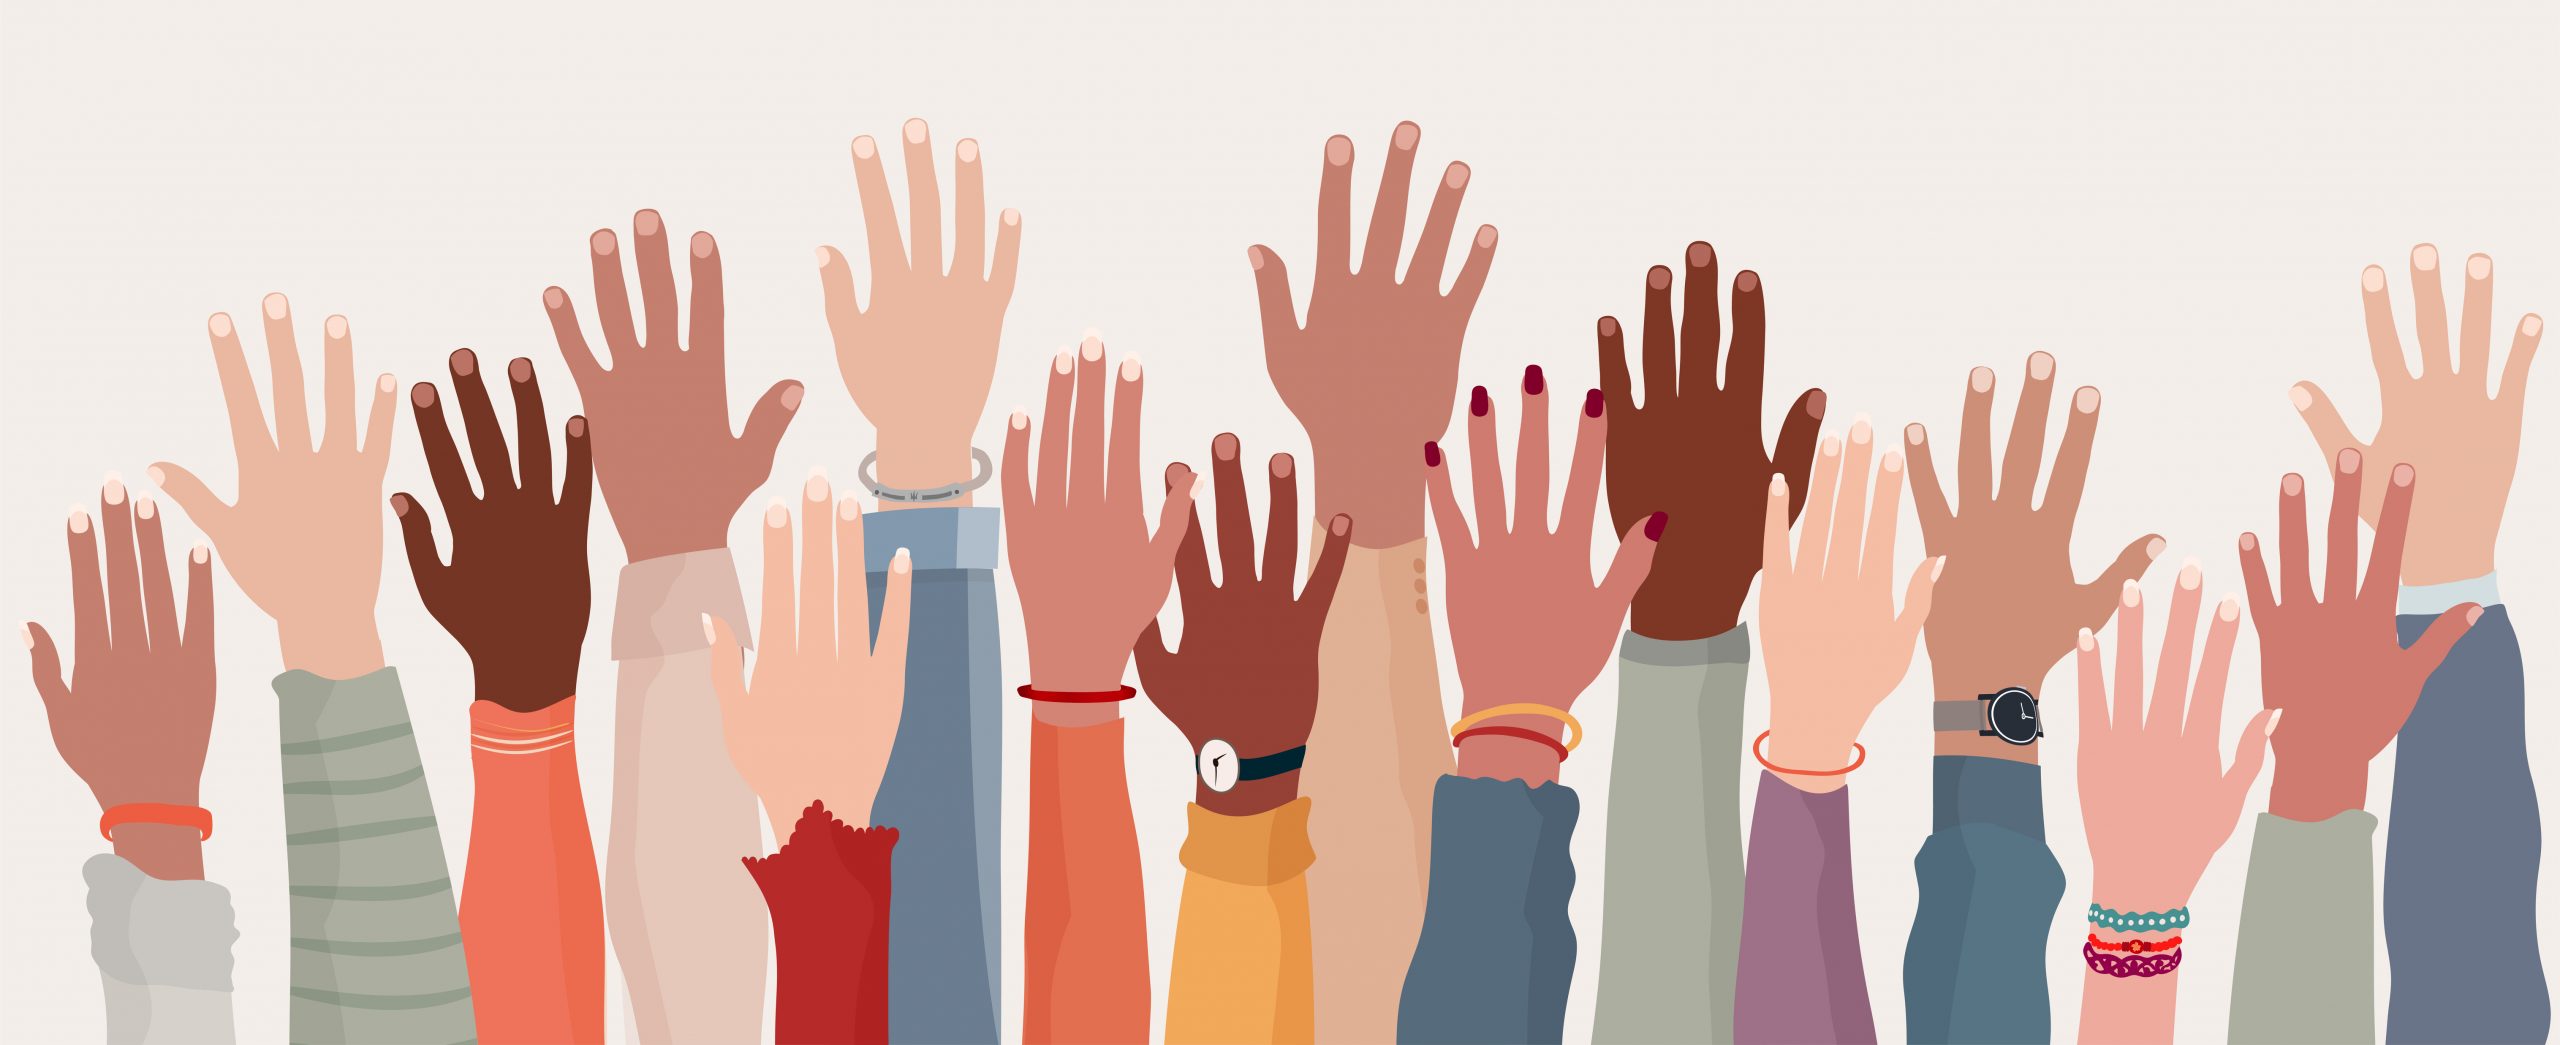 Hands with diverse skin tones reach upward together, symbolizing commitment to racial justice.